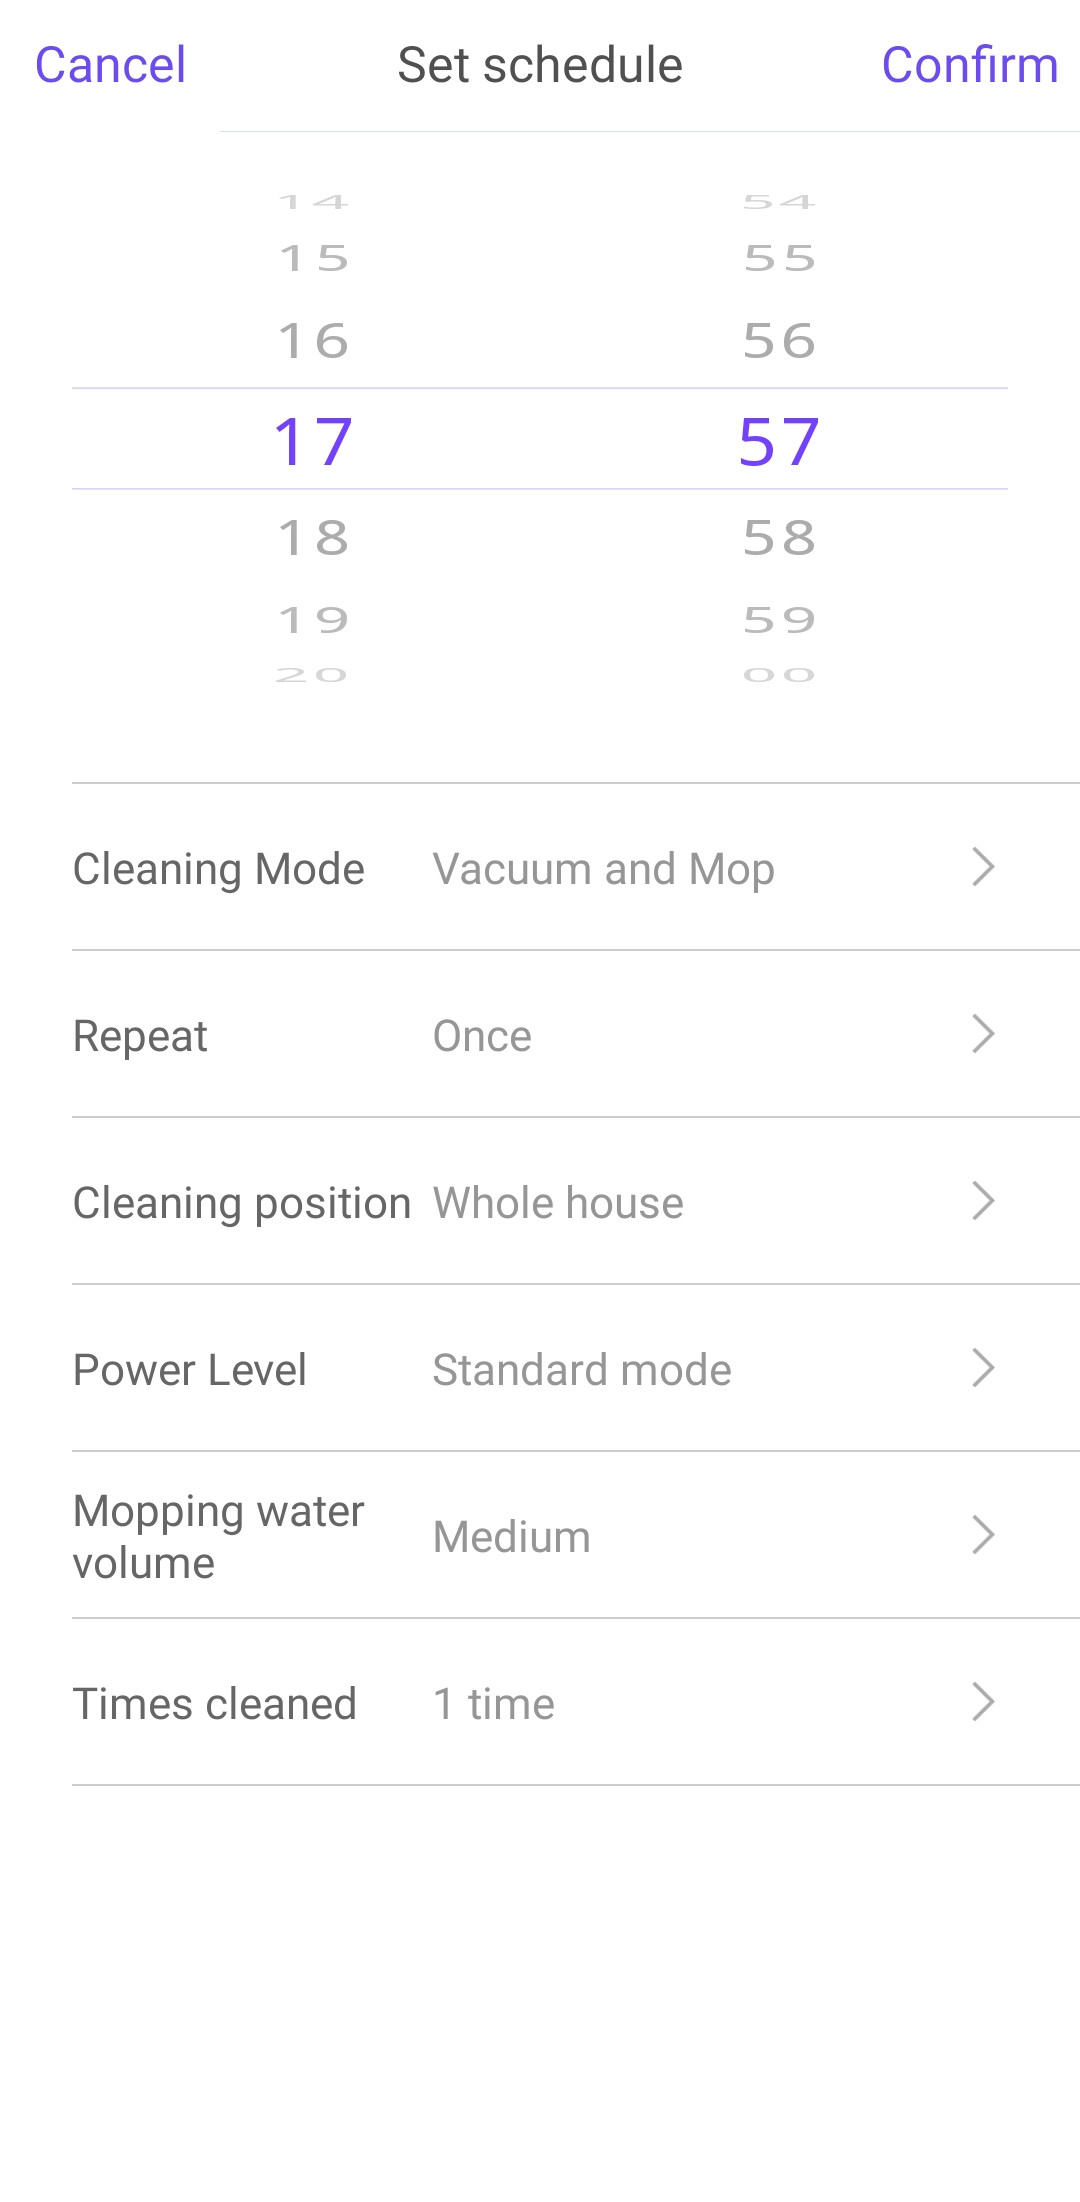 Scheduling allows to change many settings